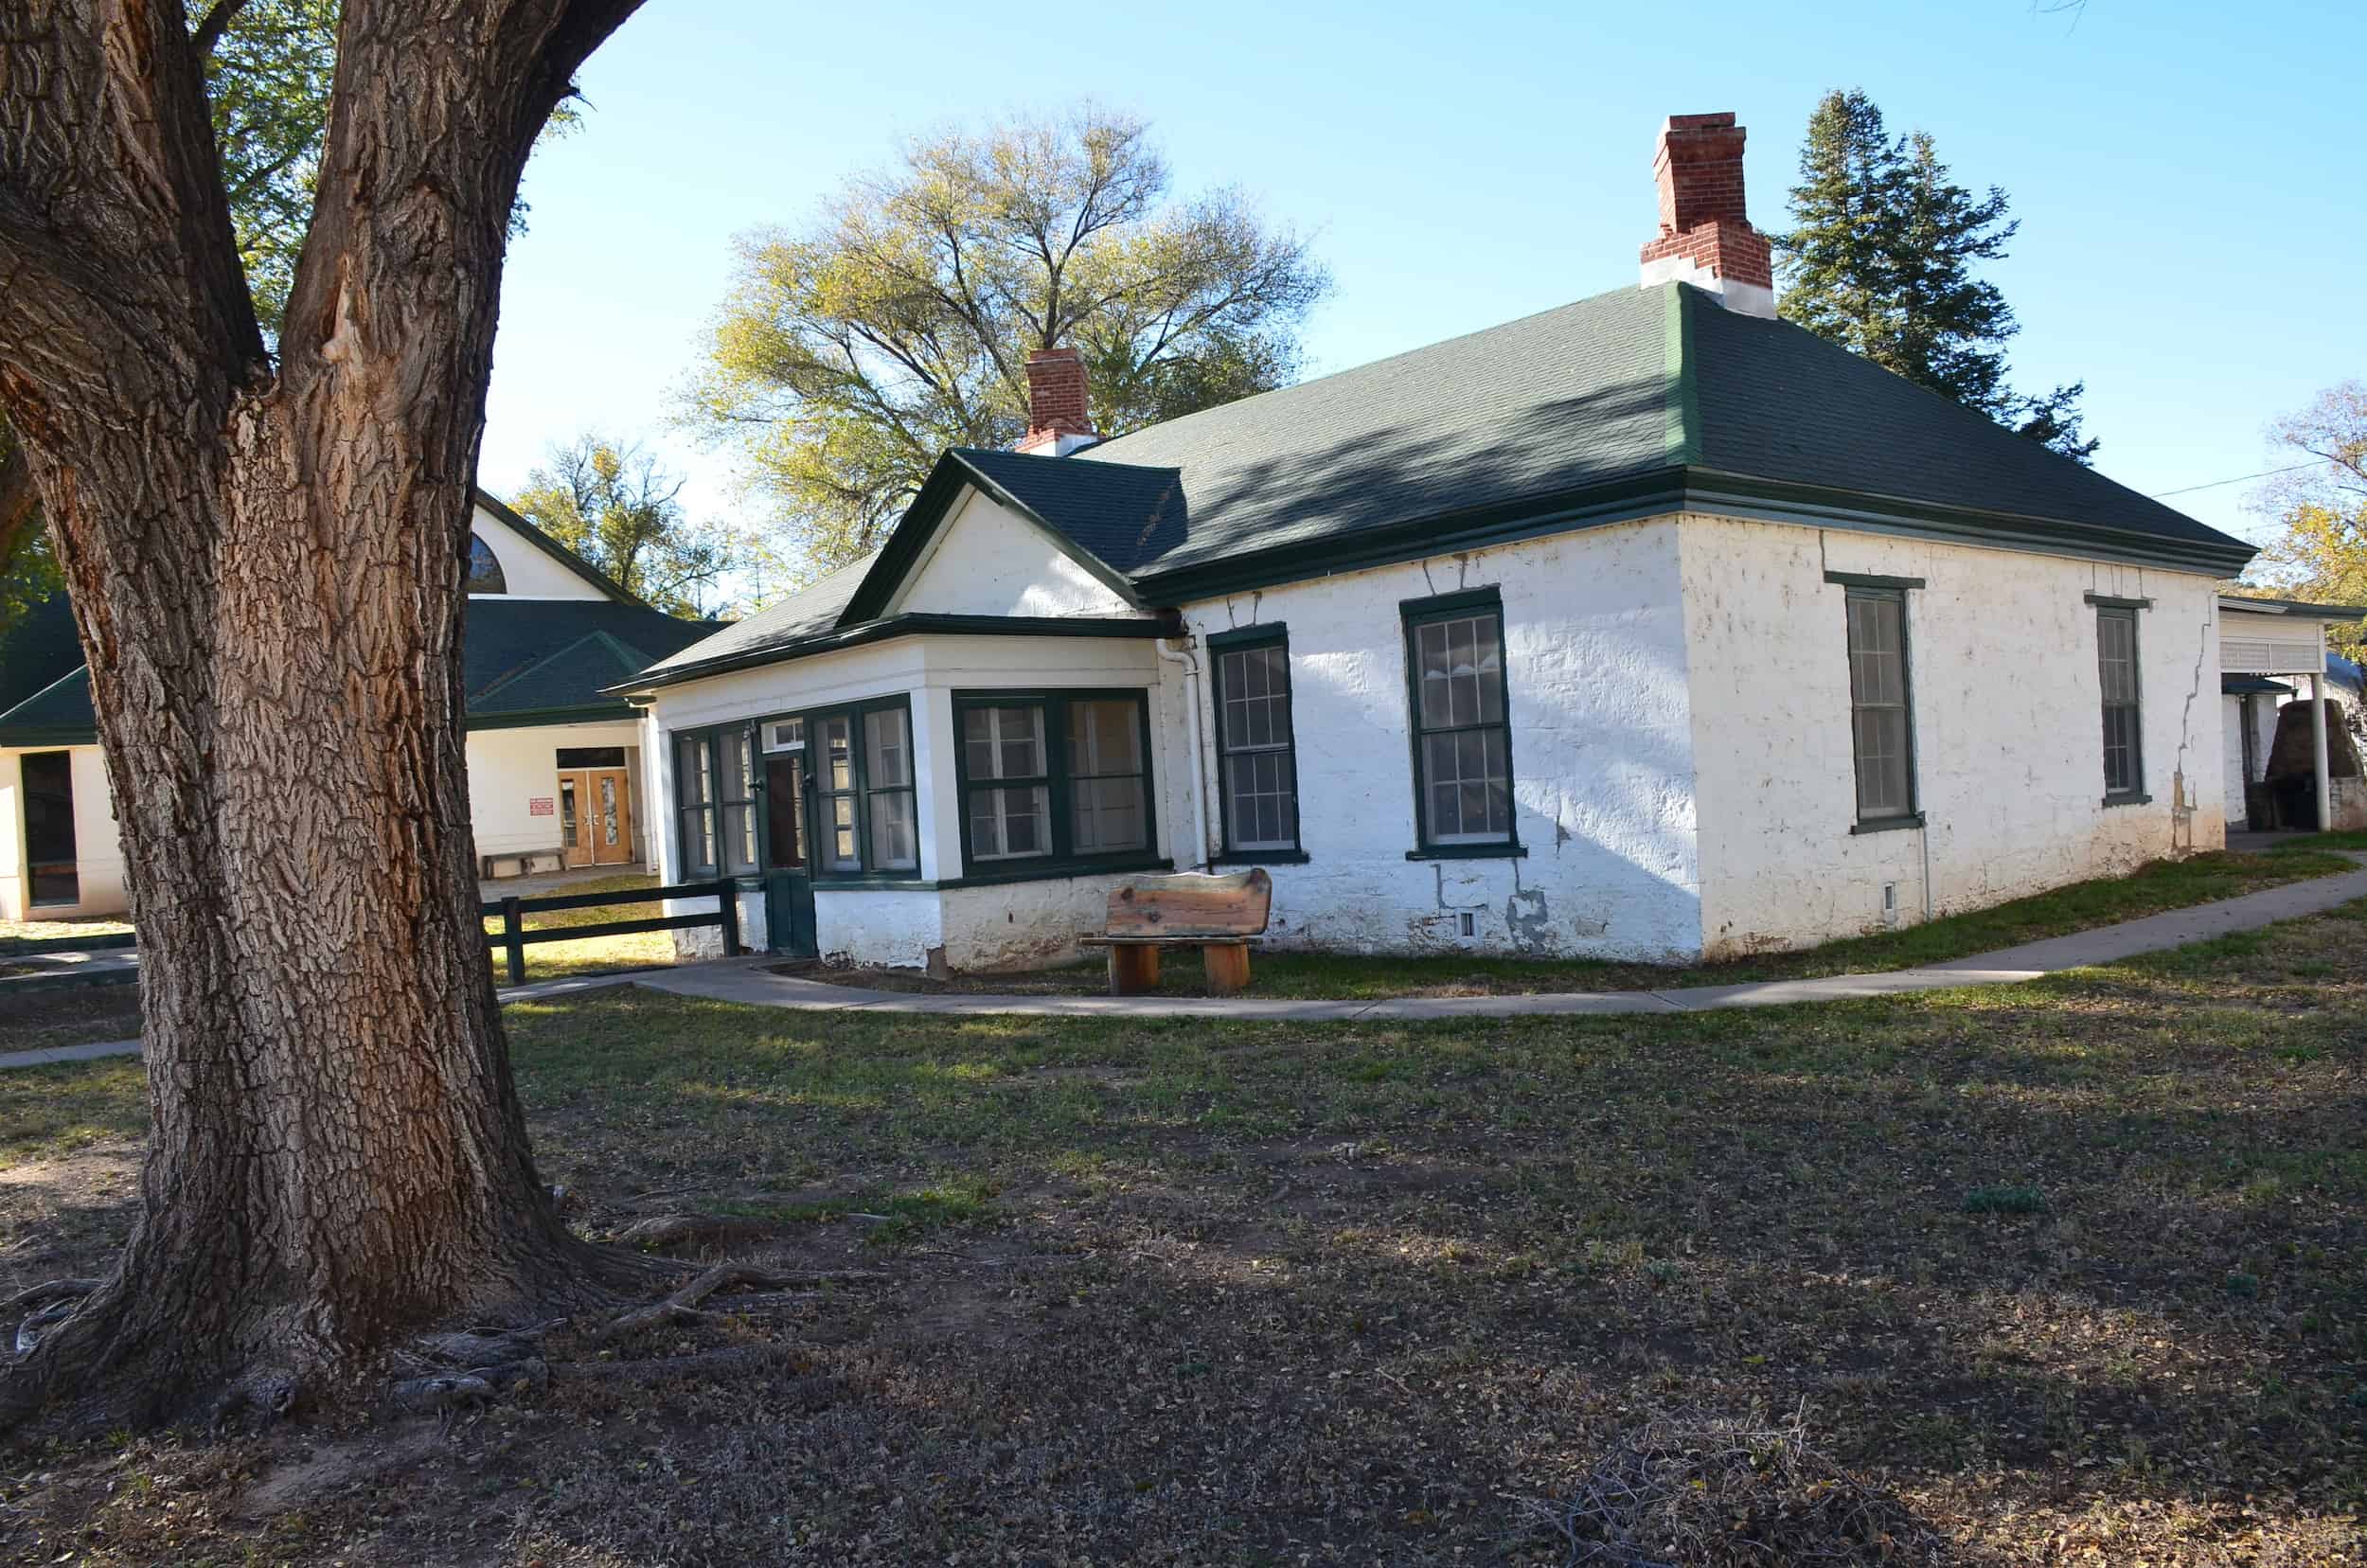 Commanding Officers' Quarters at Fort Stanton Historic Site in New Mexico